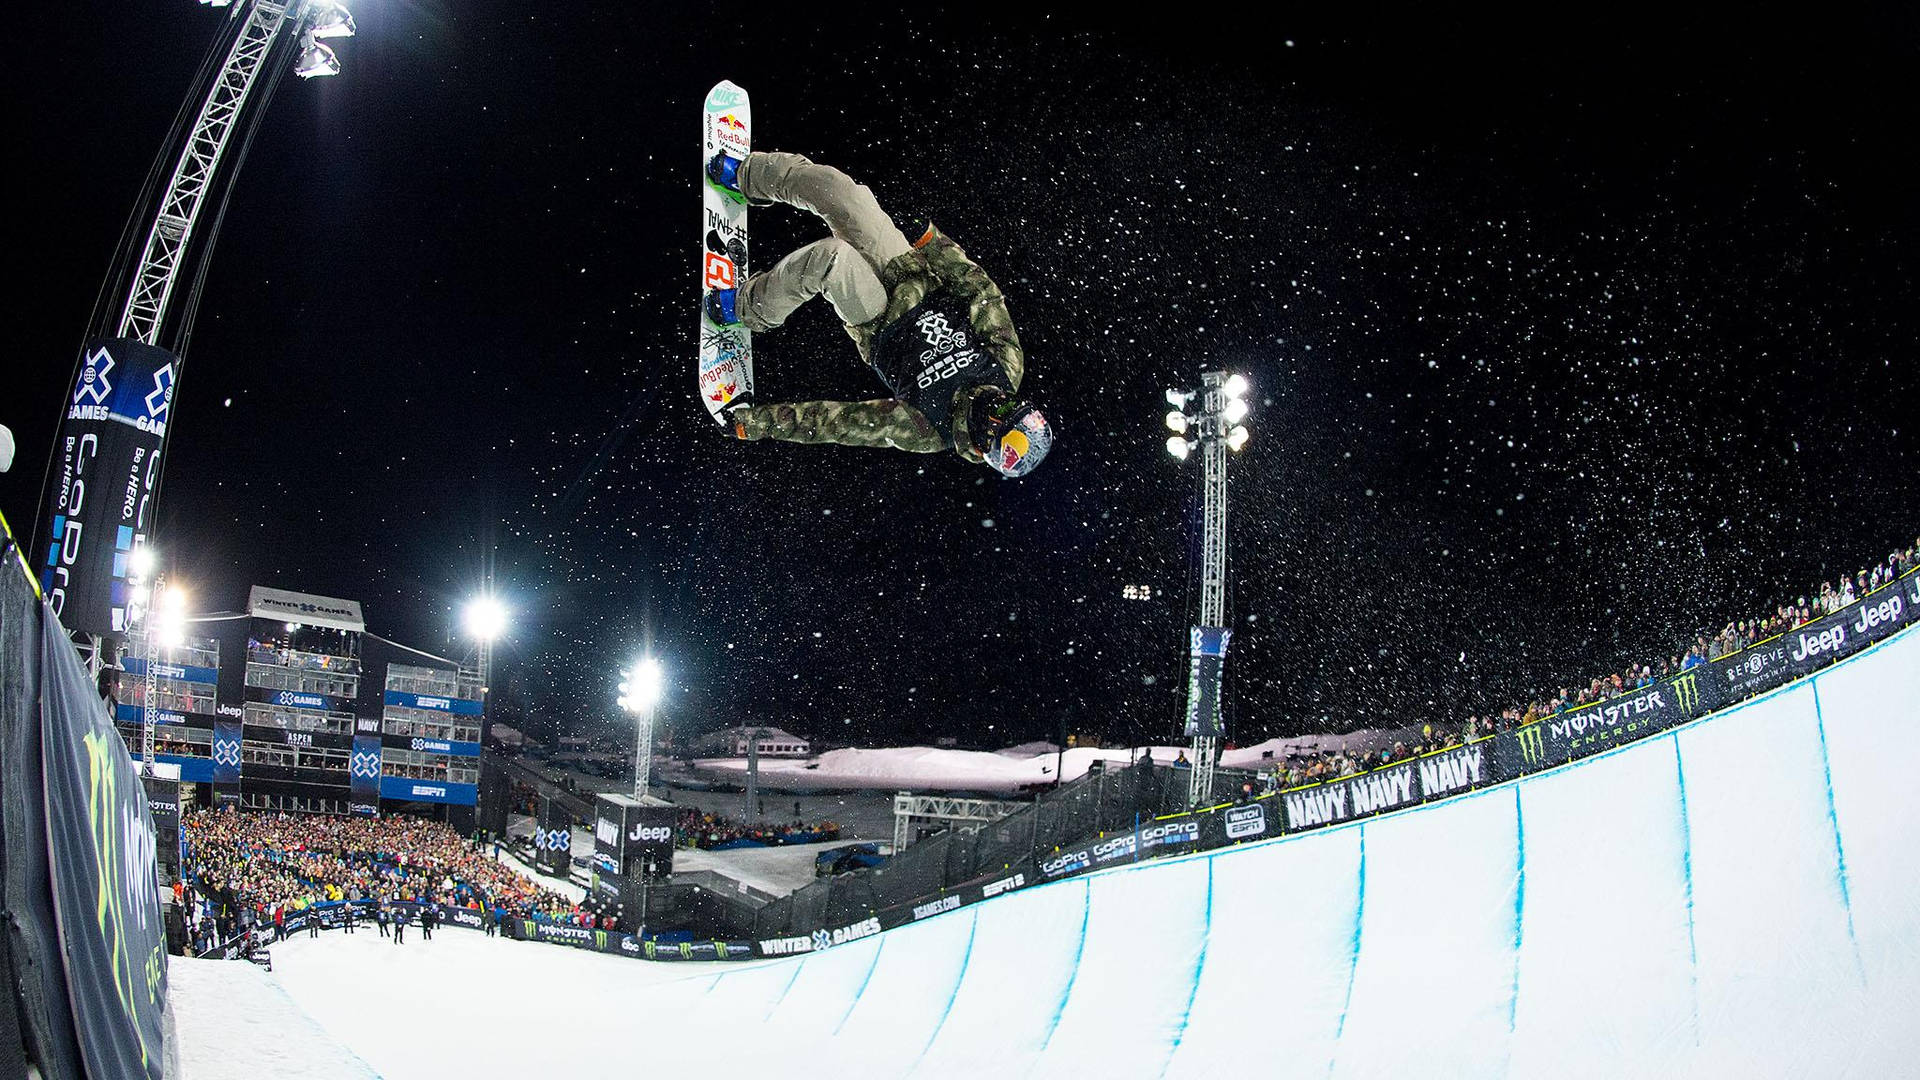 X Games Snowboarding At Night Background